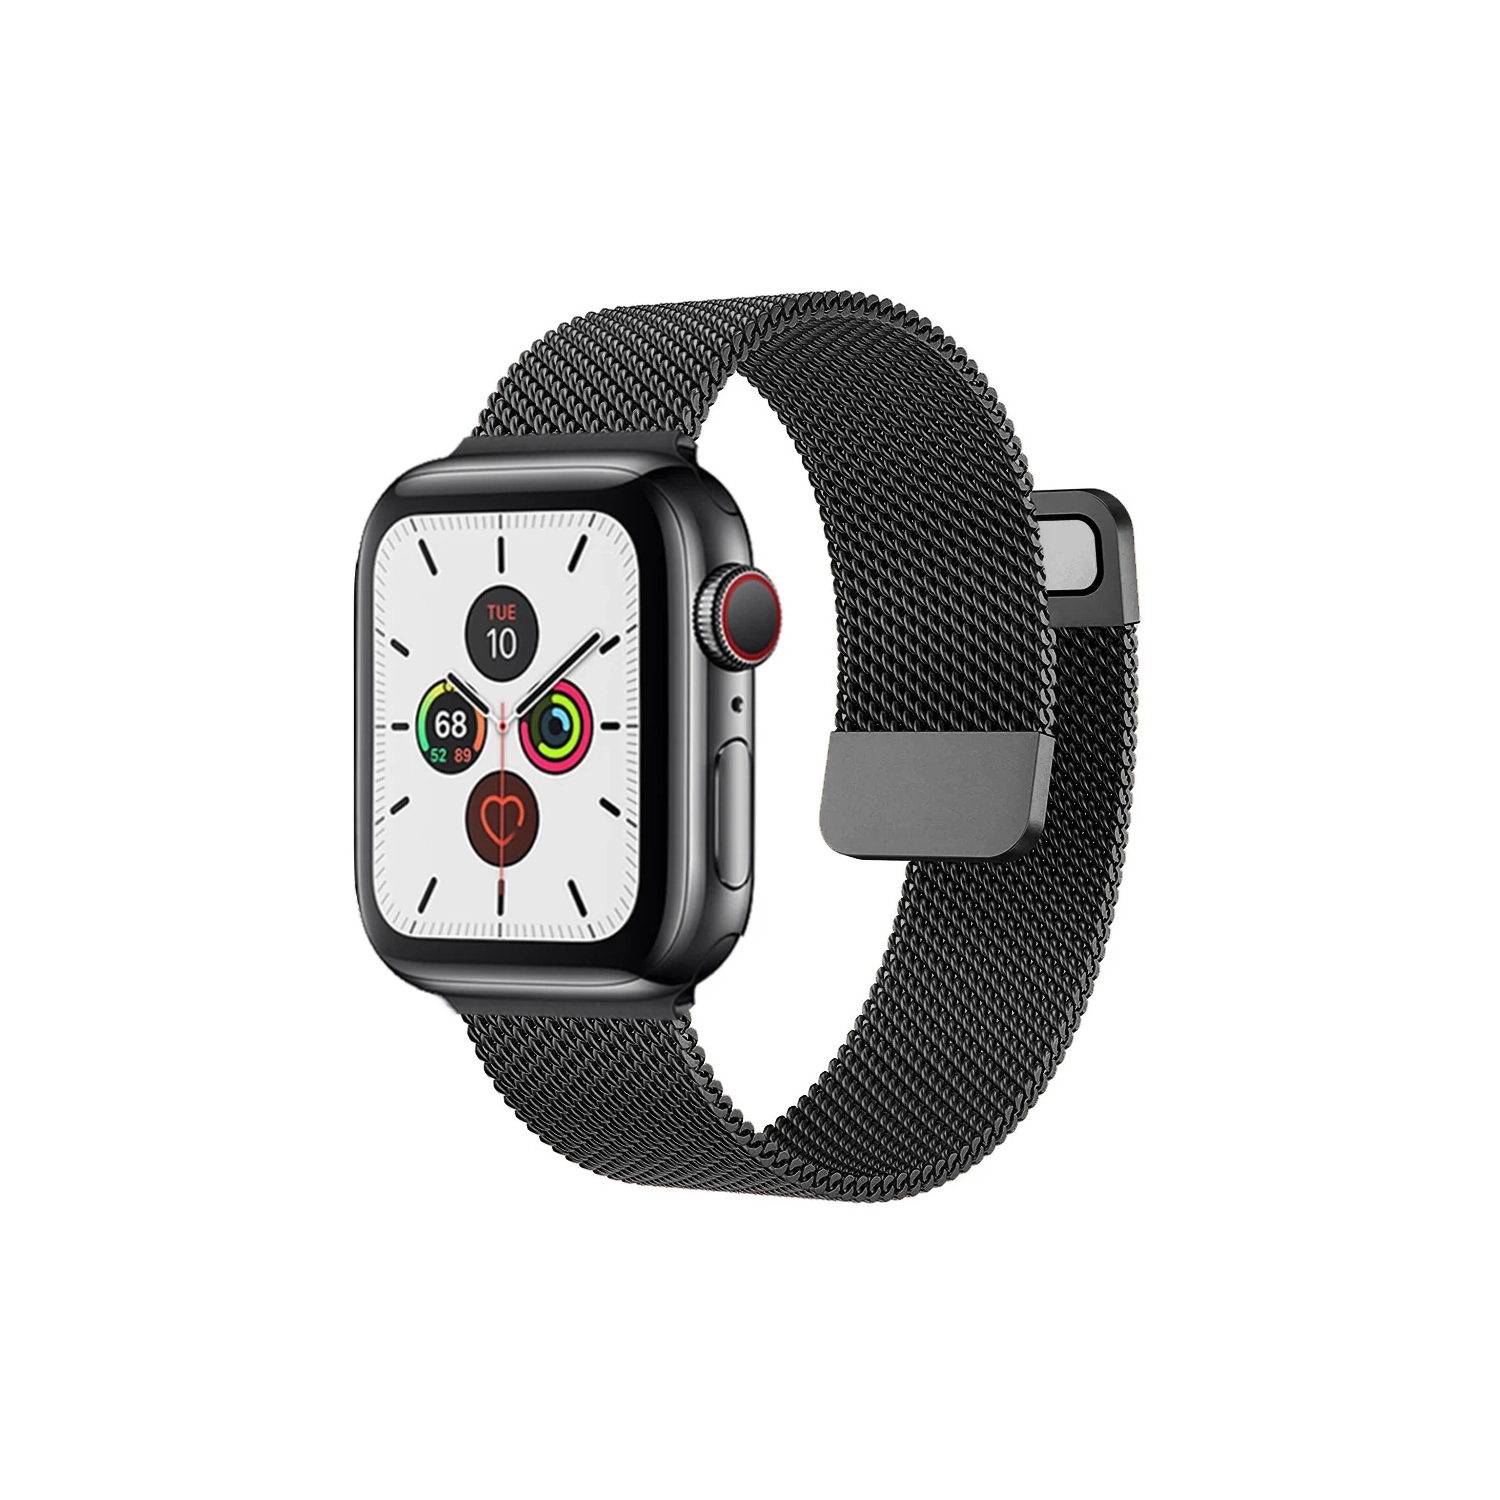 Modern Milanese Magnetic Closure iWatch Band Bracelet Strap Loop for Apple Watch Sport Edition Series 1/2/3/4/5/6/7/8/9 42mm,44mm,45mm - Grey